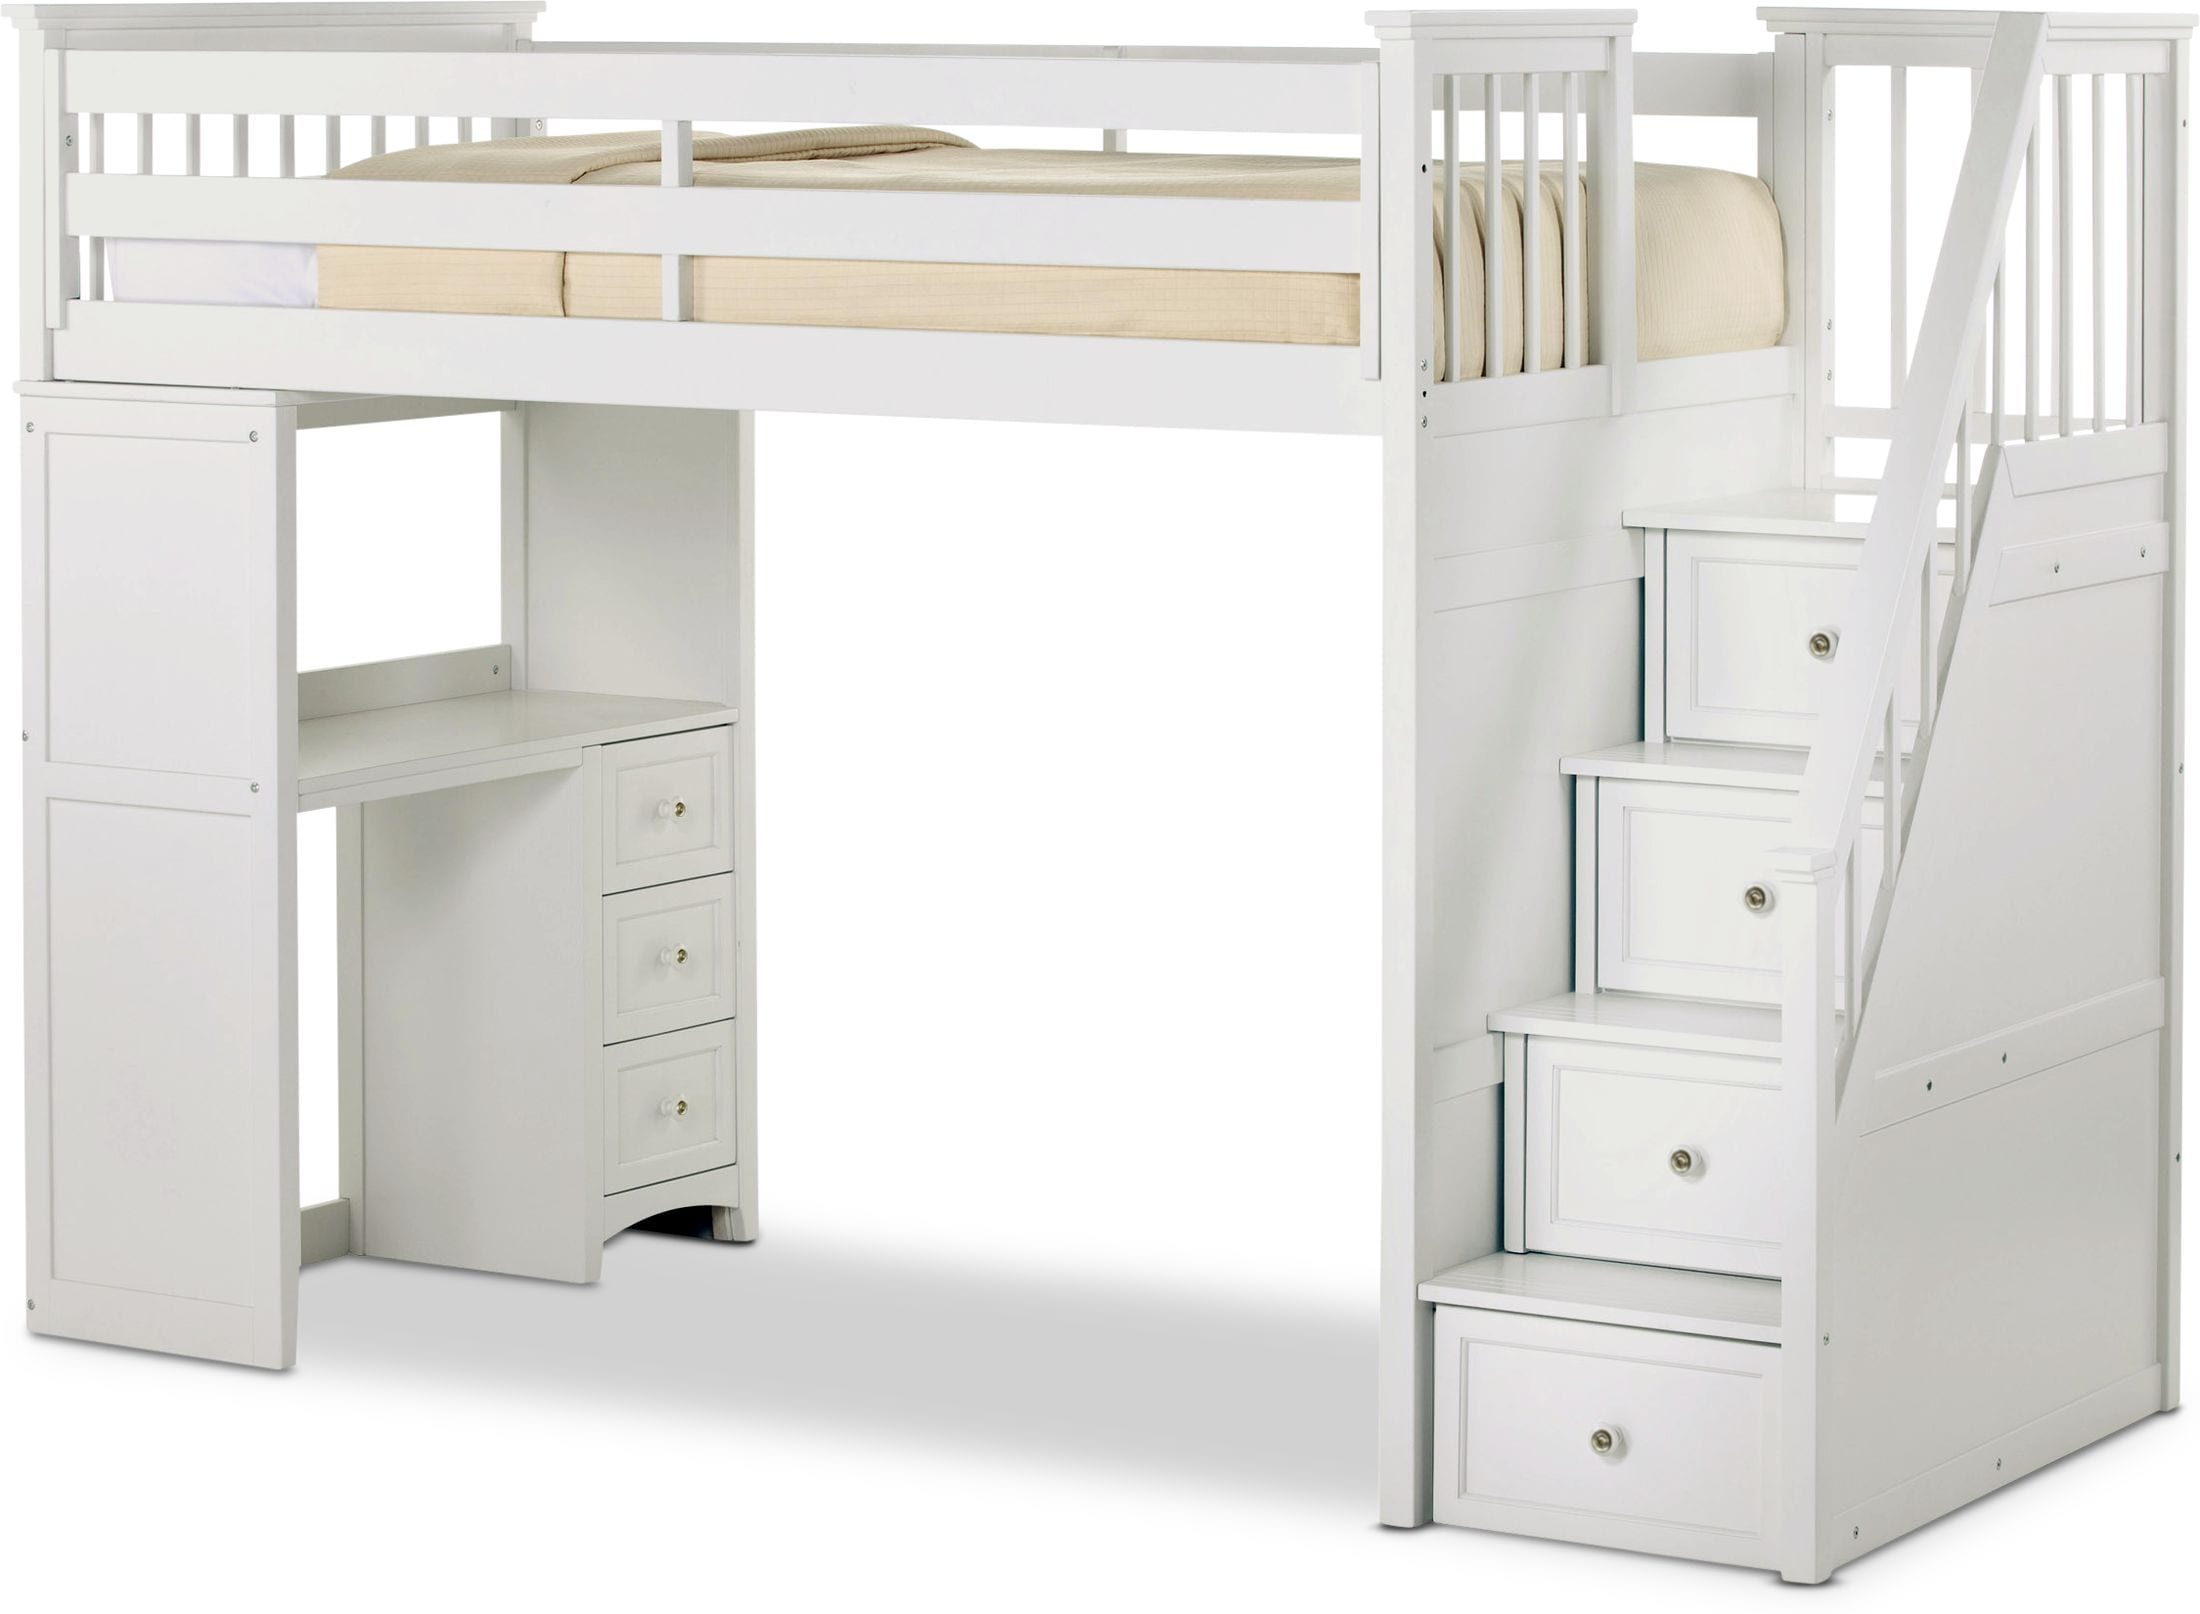 Undefined Value City Furniture, Value City Bunk Beds With Stairs